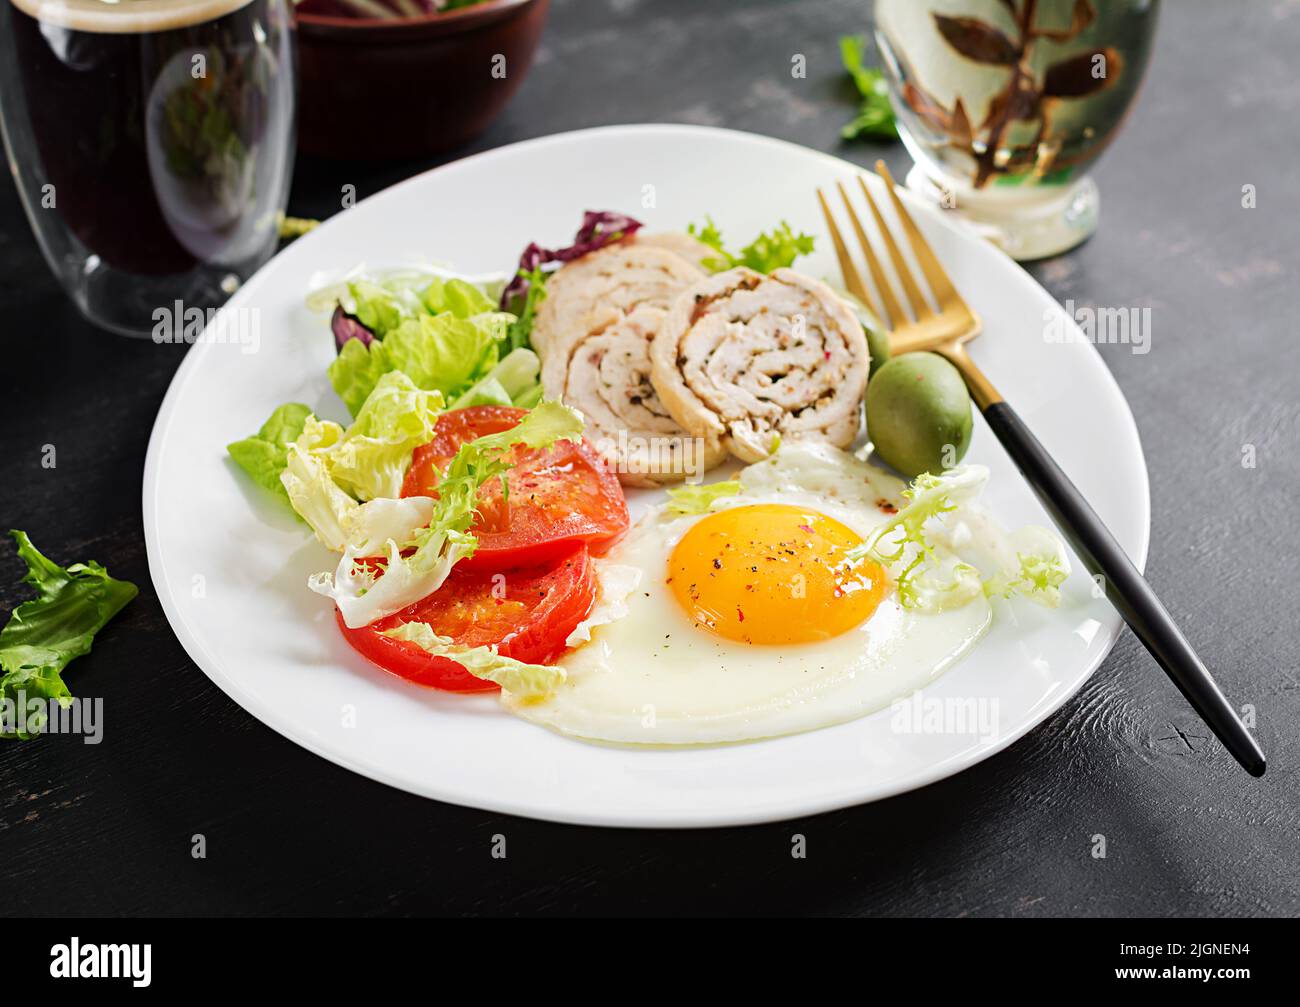 Fried egg, meat chicken roll, olives and tomatoes. Keto, paleo breakfast. Ketogenic food. Stock Photo